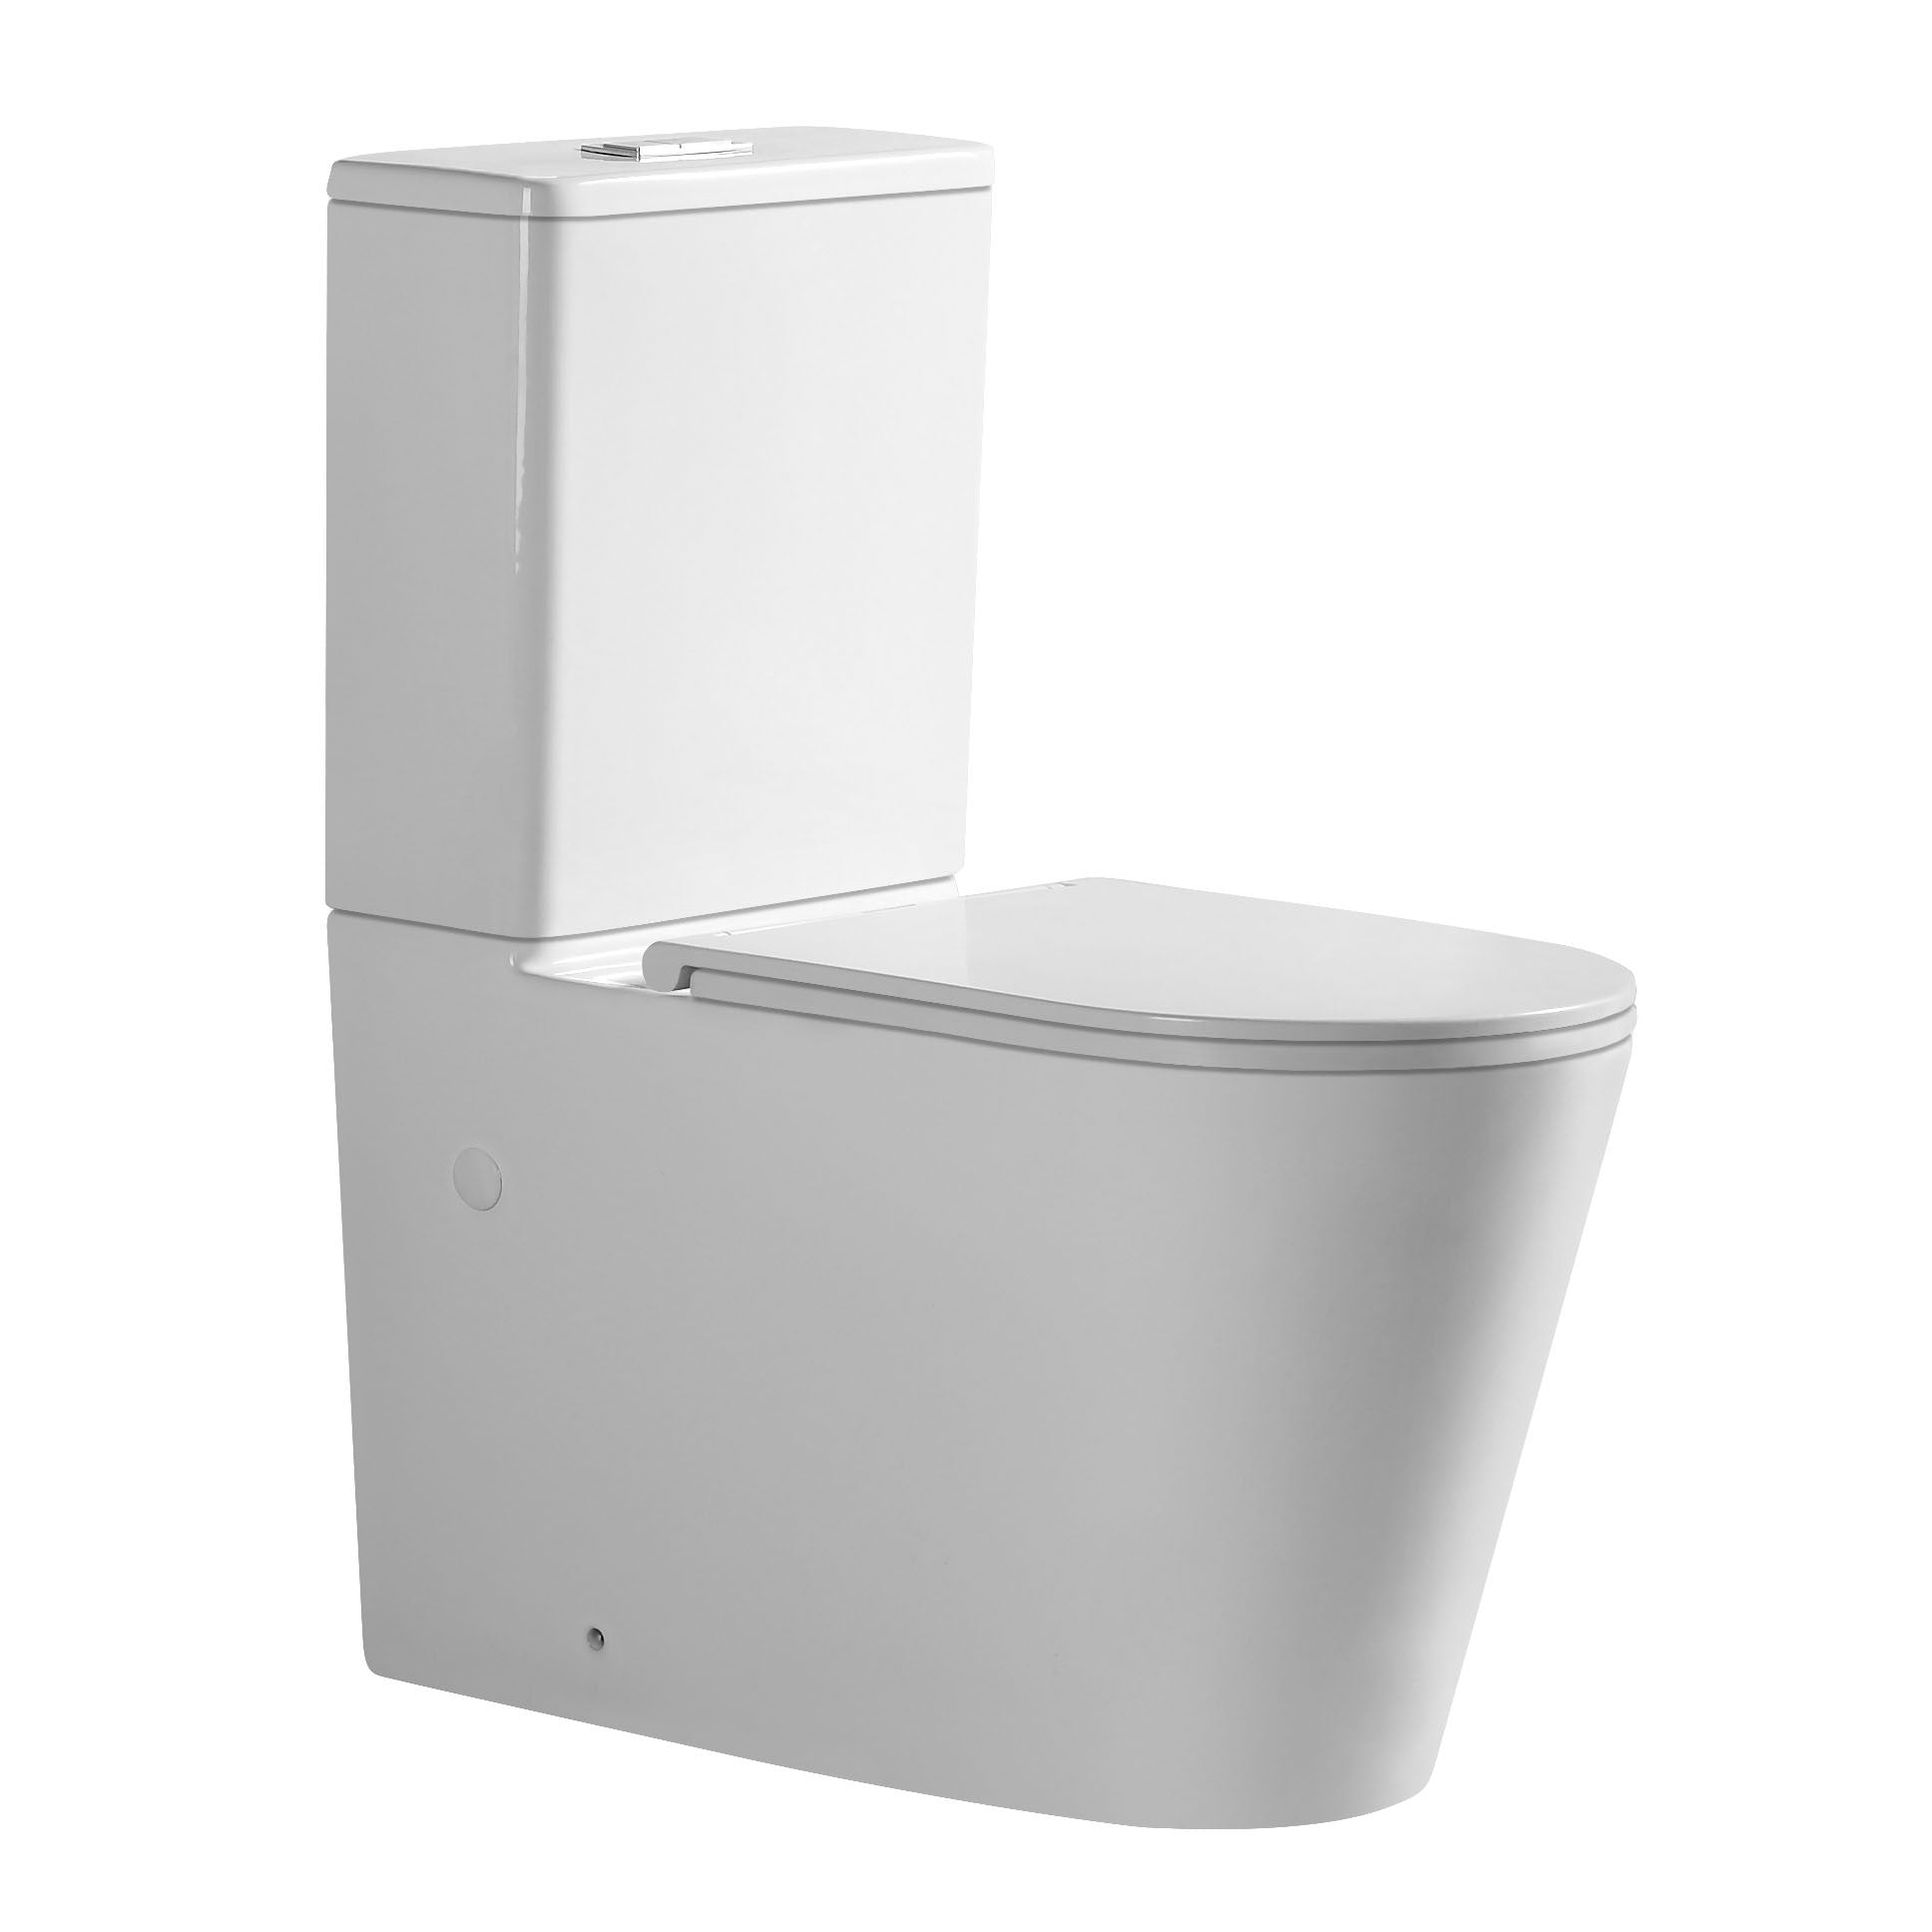 ECT Global Jess Rimless Wall Faced Toilet Suite